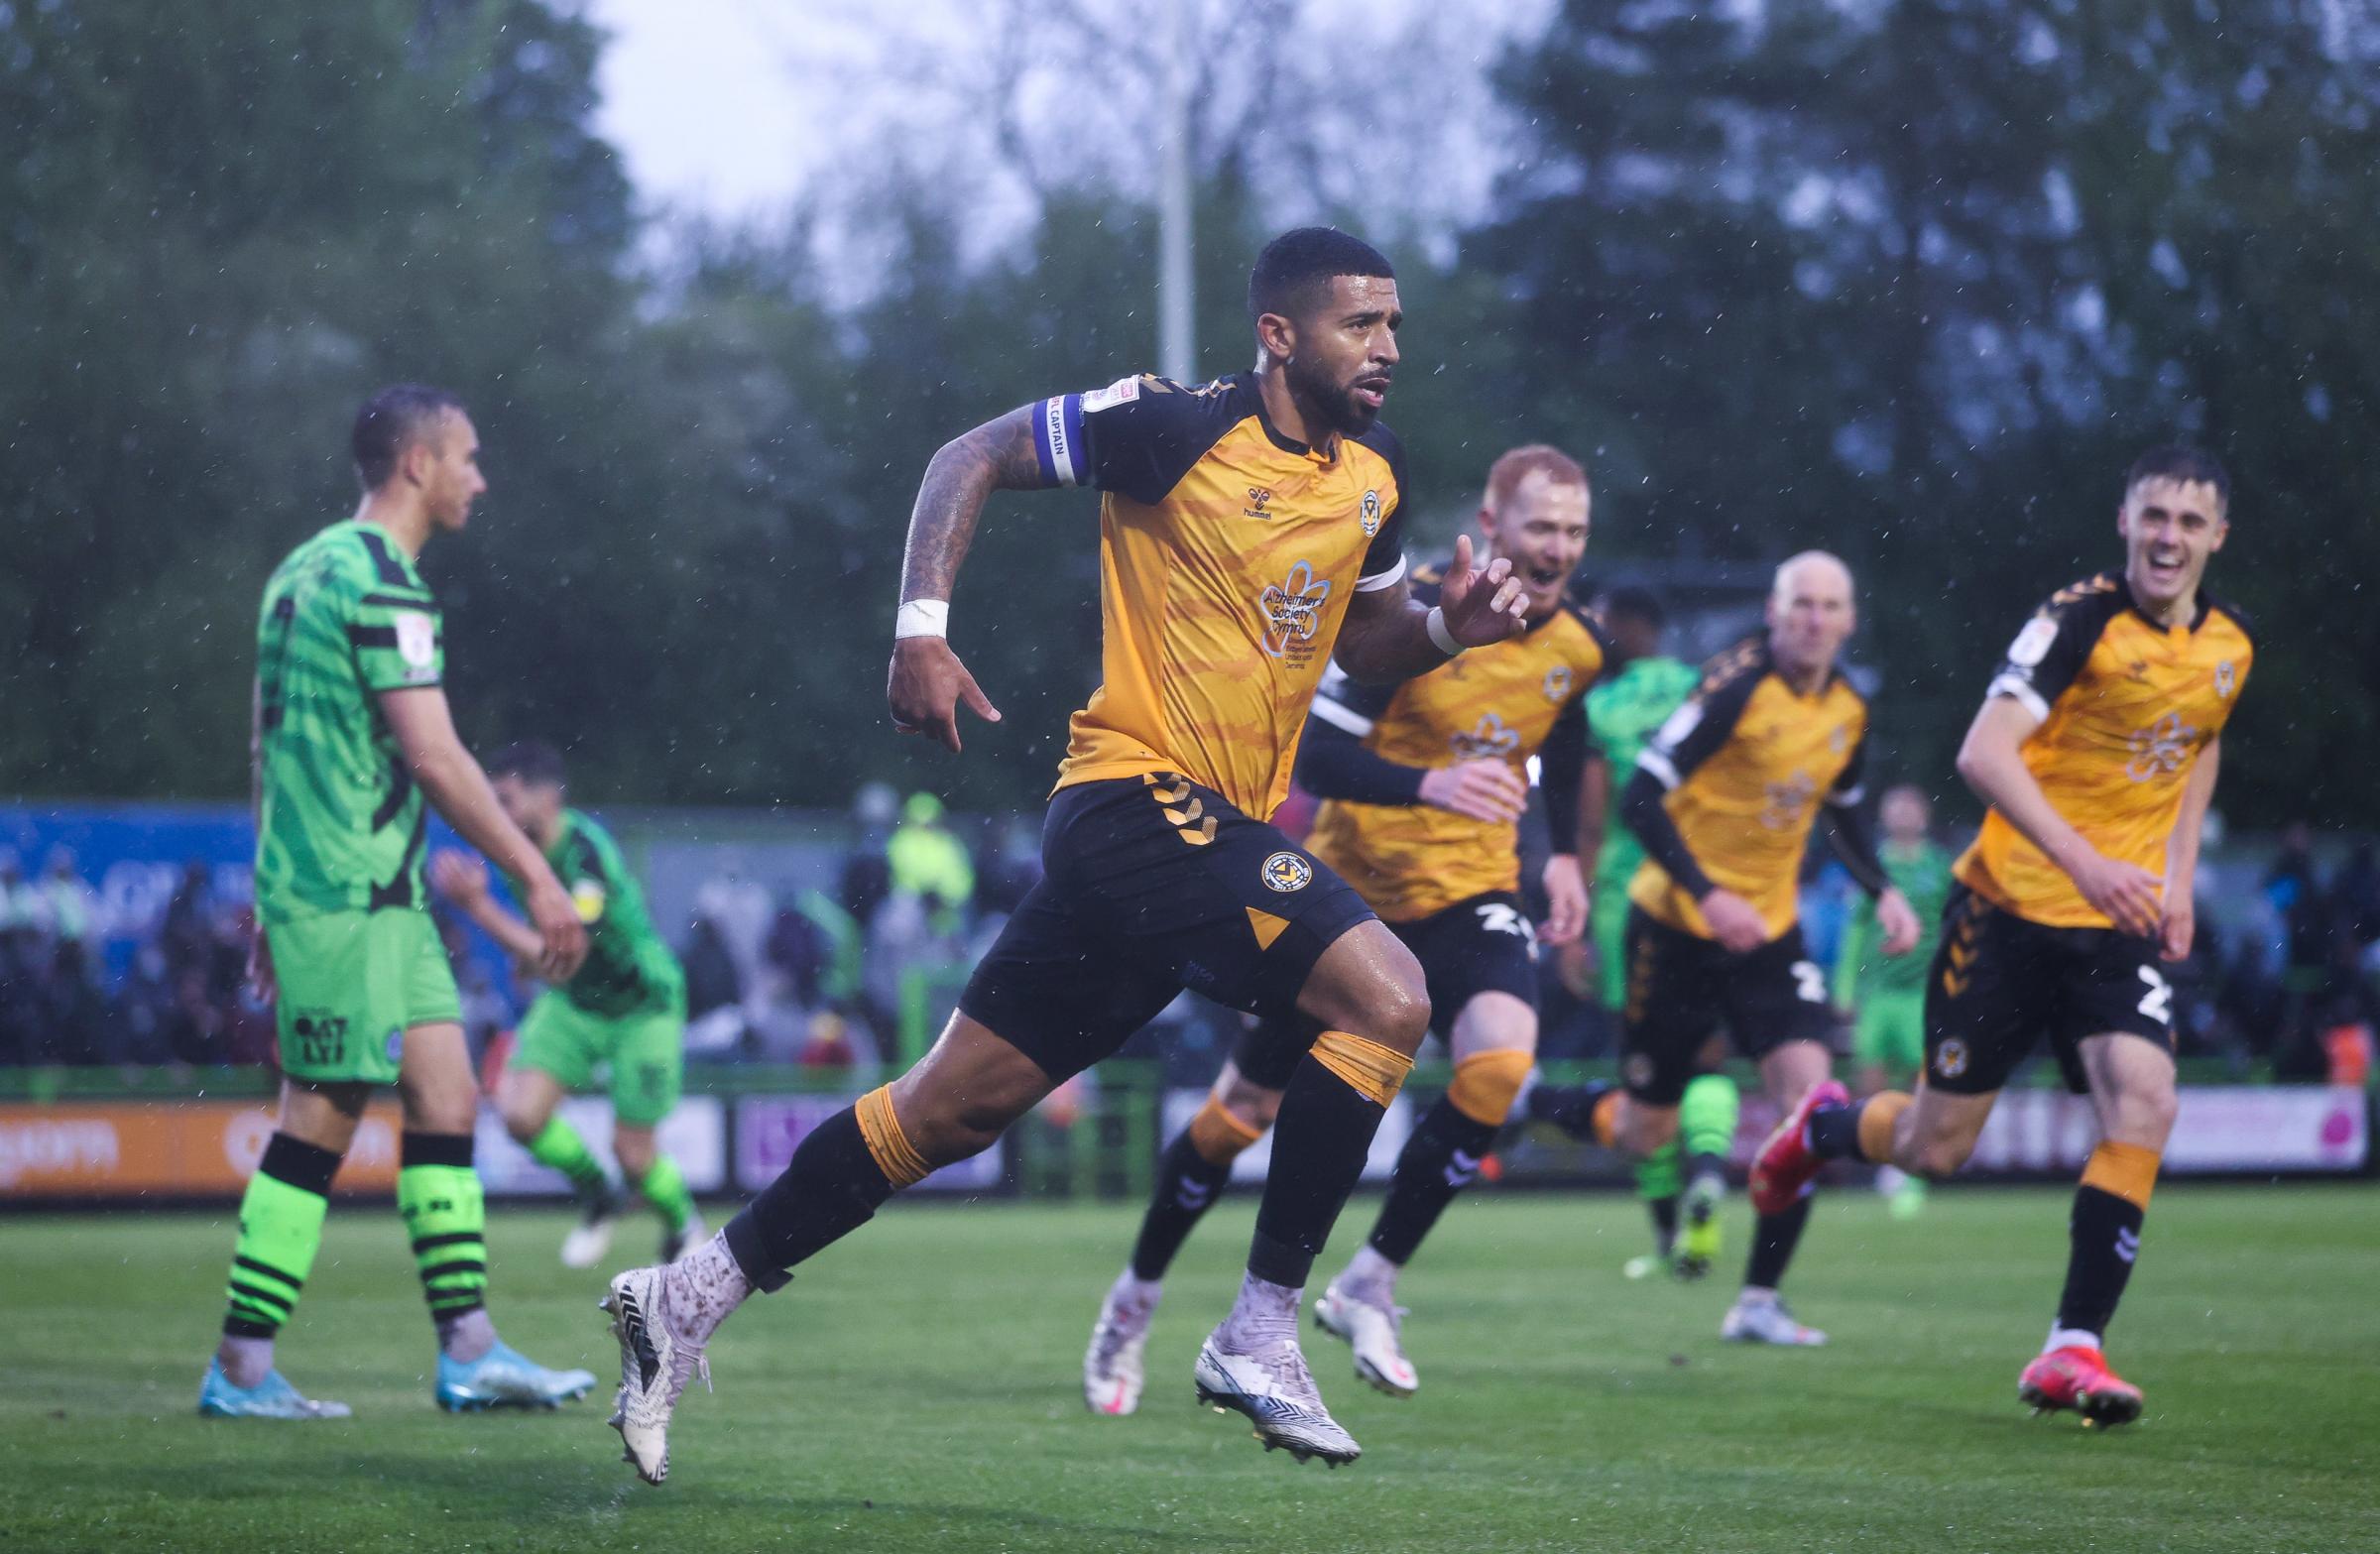 23.05.21 - Forest Green Rovers v Newport County - SkyBet League Two Play off Semi-Final, Second Leg - Joss Labadie of Newport County wheels away to celebrate after scoring the second goal